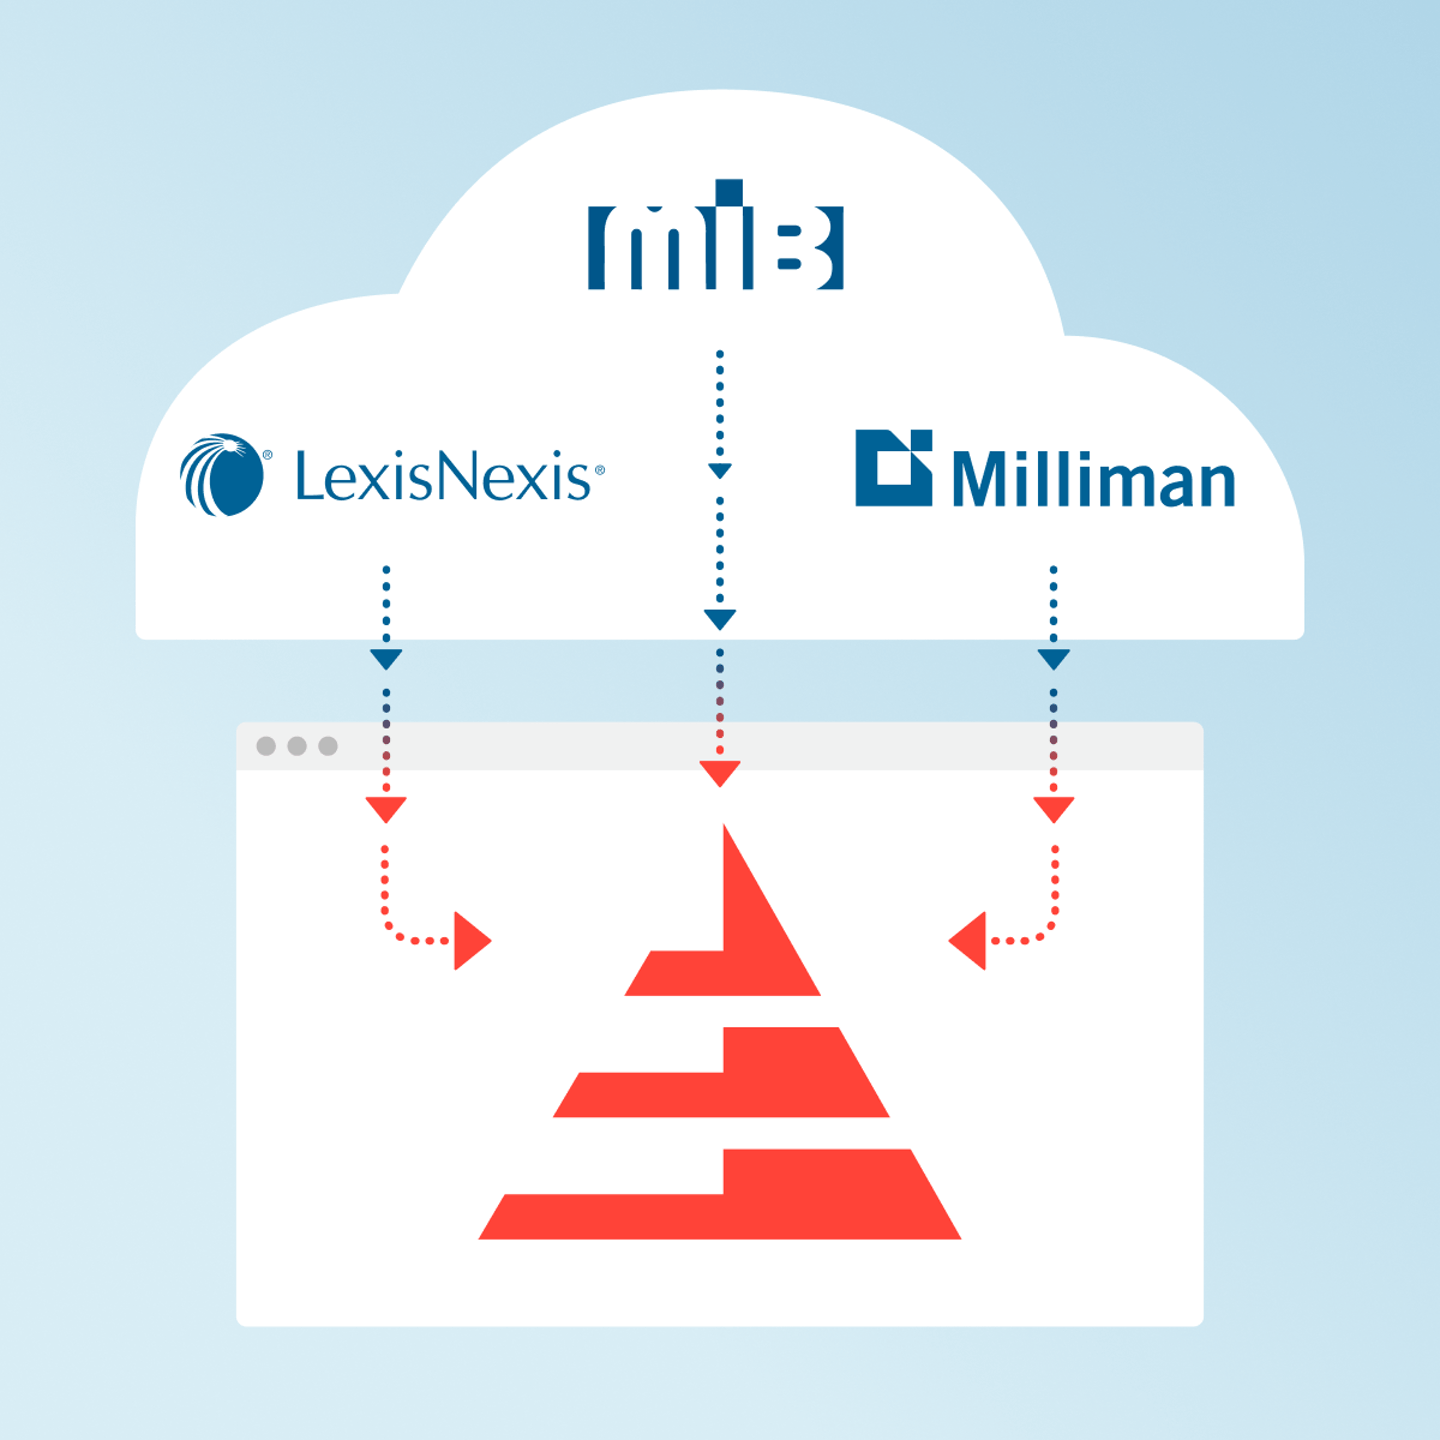 Third Party Integration to All Leading Services: MIB, Milliman, USPS, LexisNexis, PeopleSoft, Docusign, ACORD and many more. Check out our full list of integration partners.